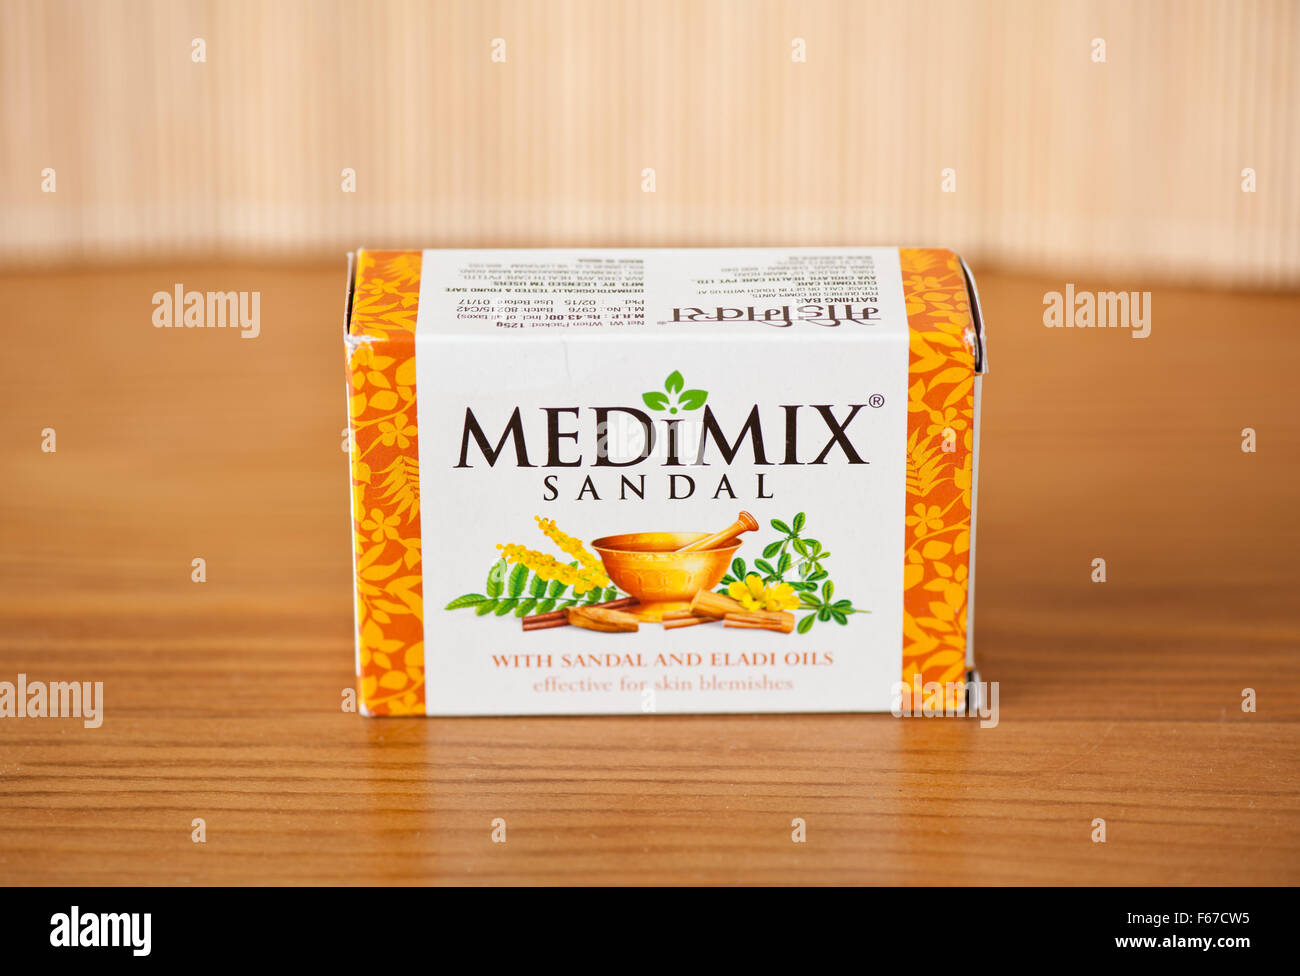 Medimix sandal soap, hand made cosmetic for skin with sandal and eladi oils, effective for skin blemishes, 125g in carton pack Stock Photo